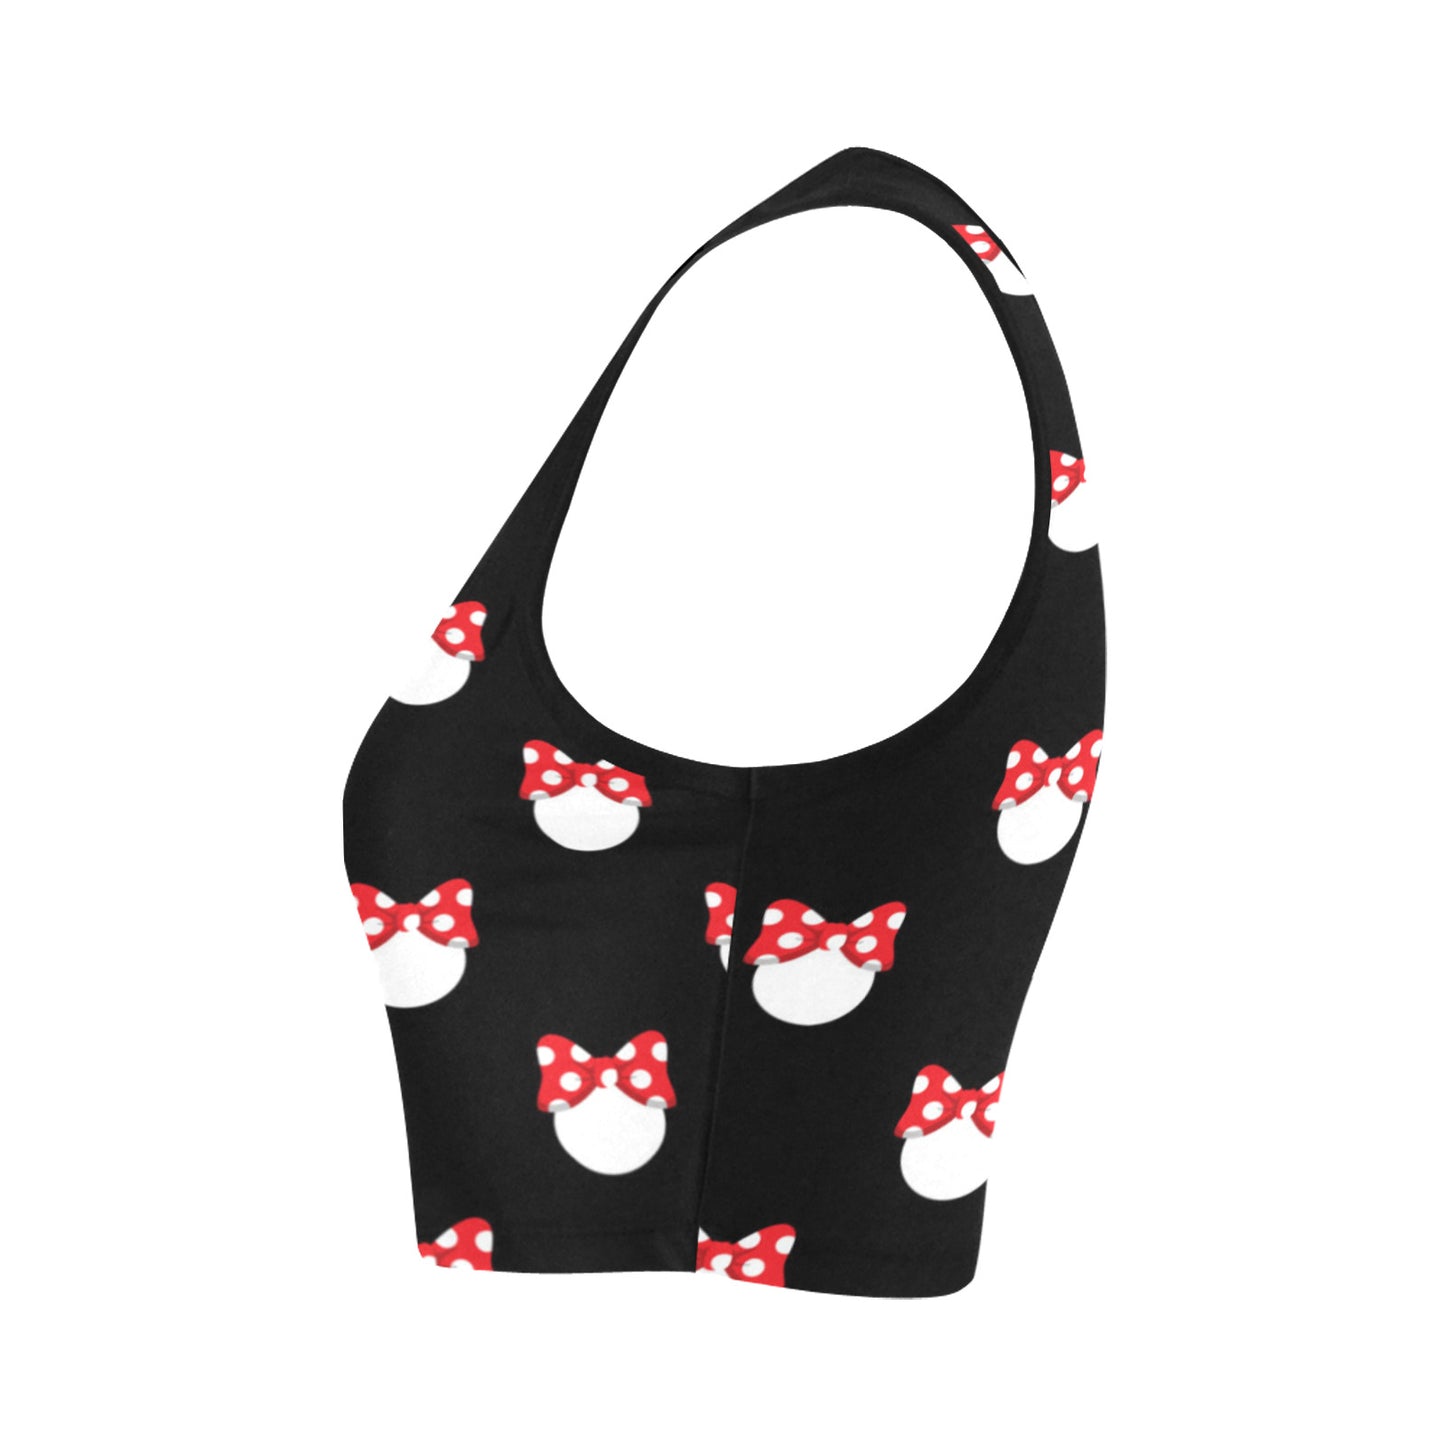 White Polka Dot Red Bow Women's Athletic Crop Top